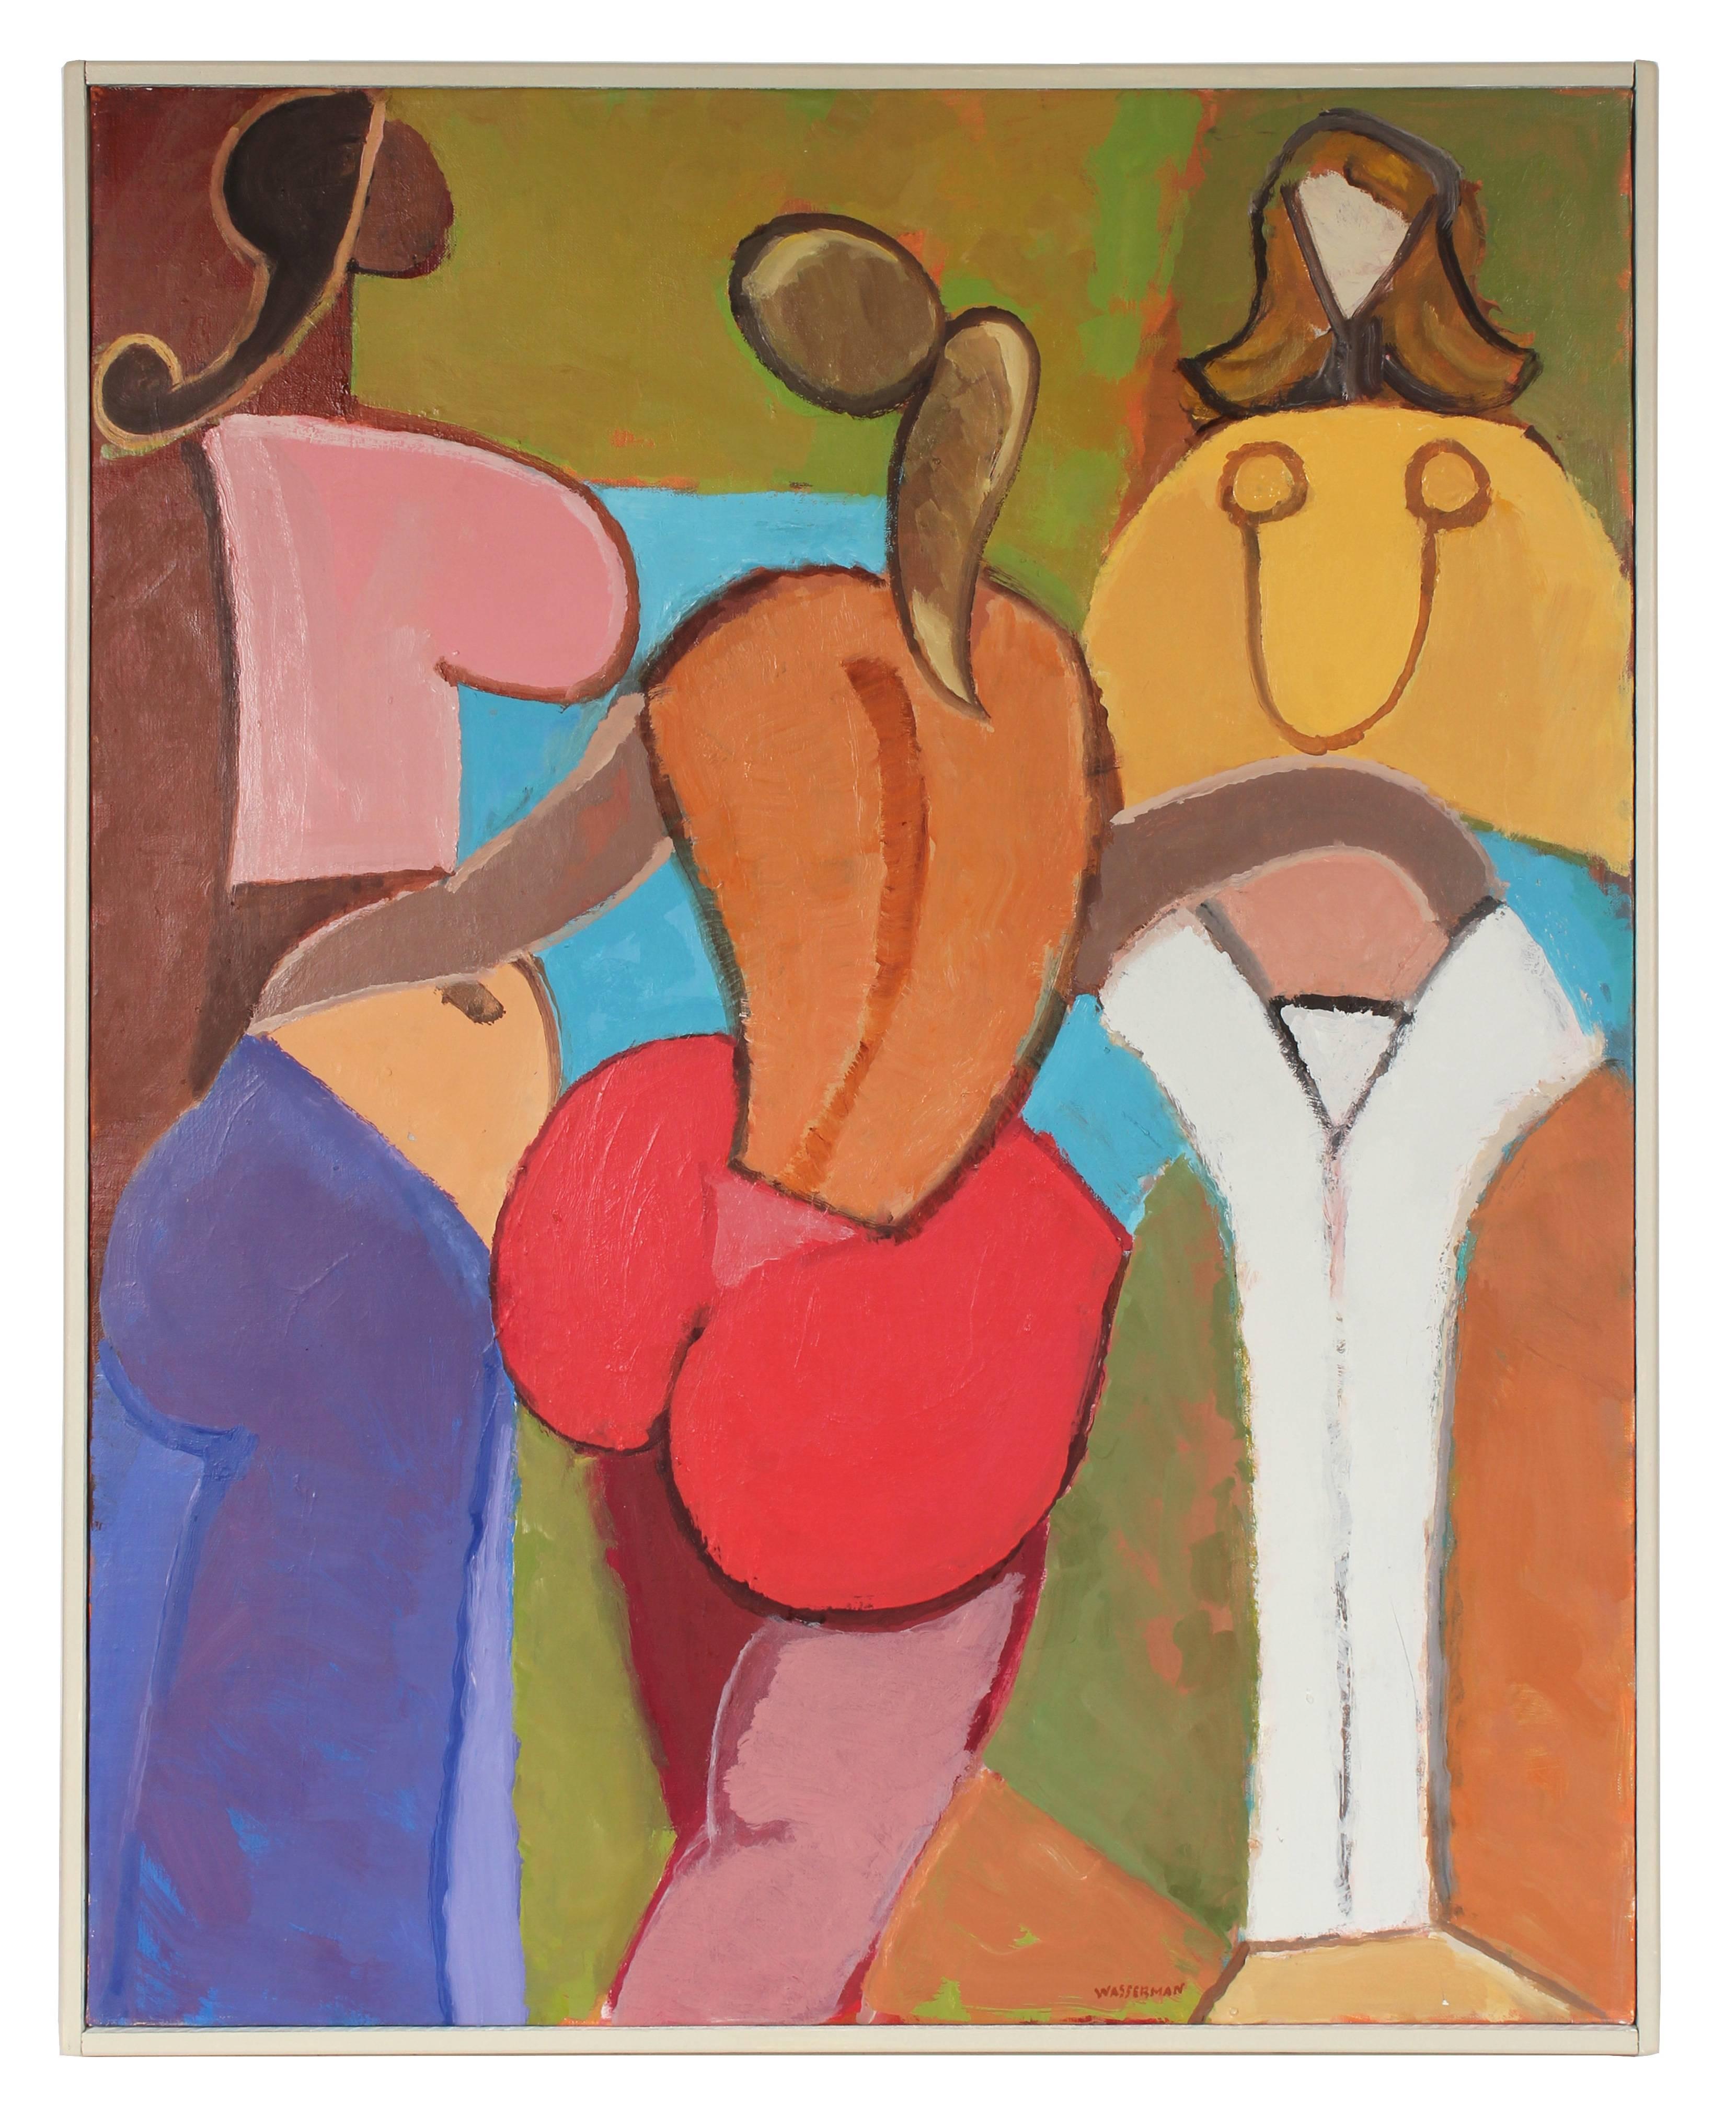 Gerald Wasserman Figurative Painting - Bright Abstracted Female Figures in Oil, 20th Century